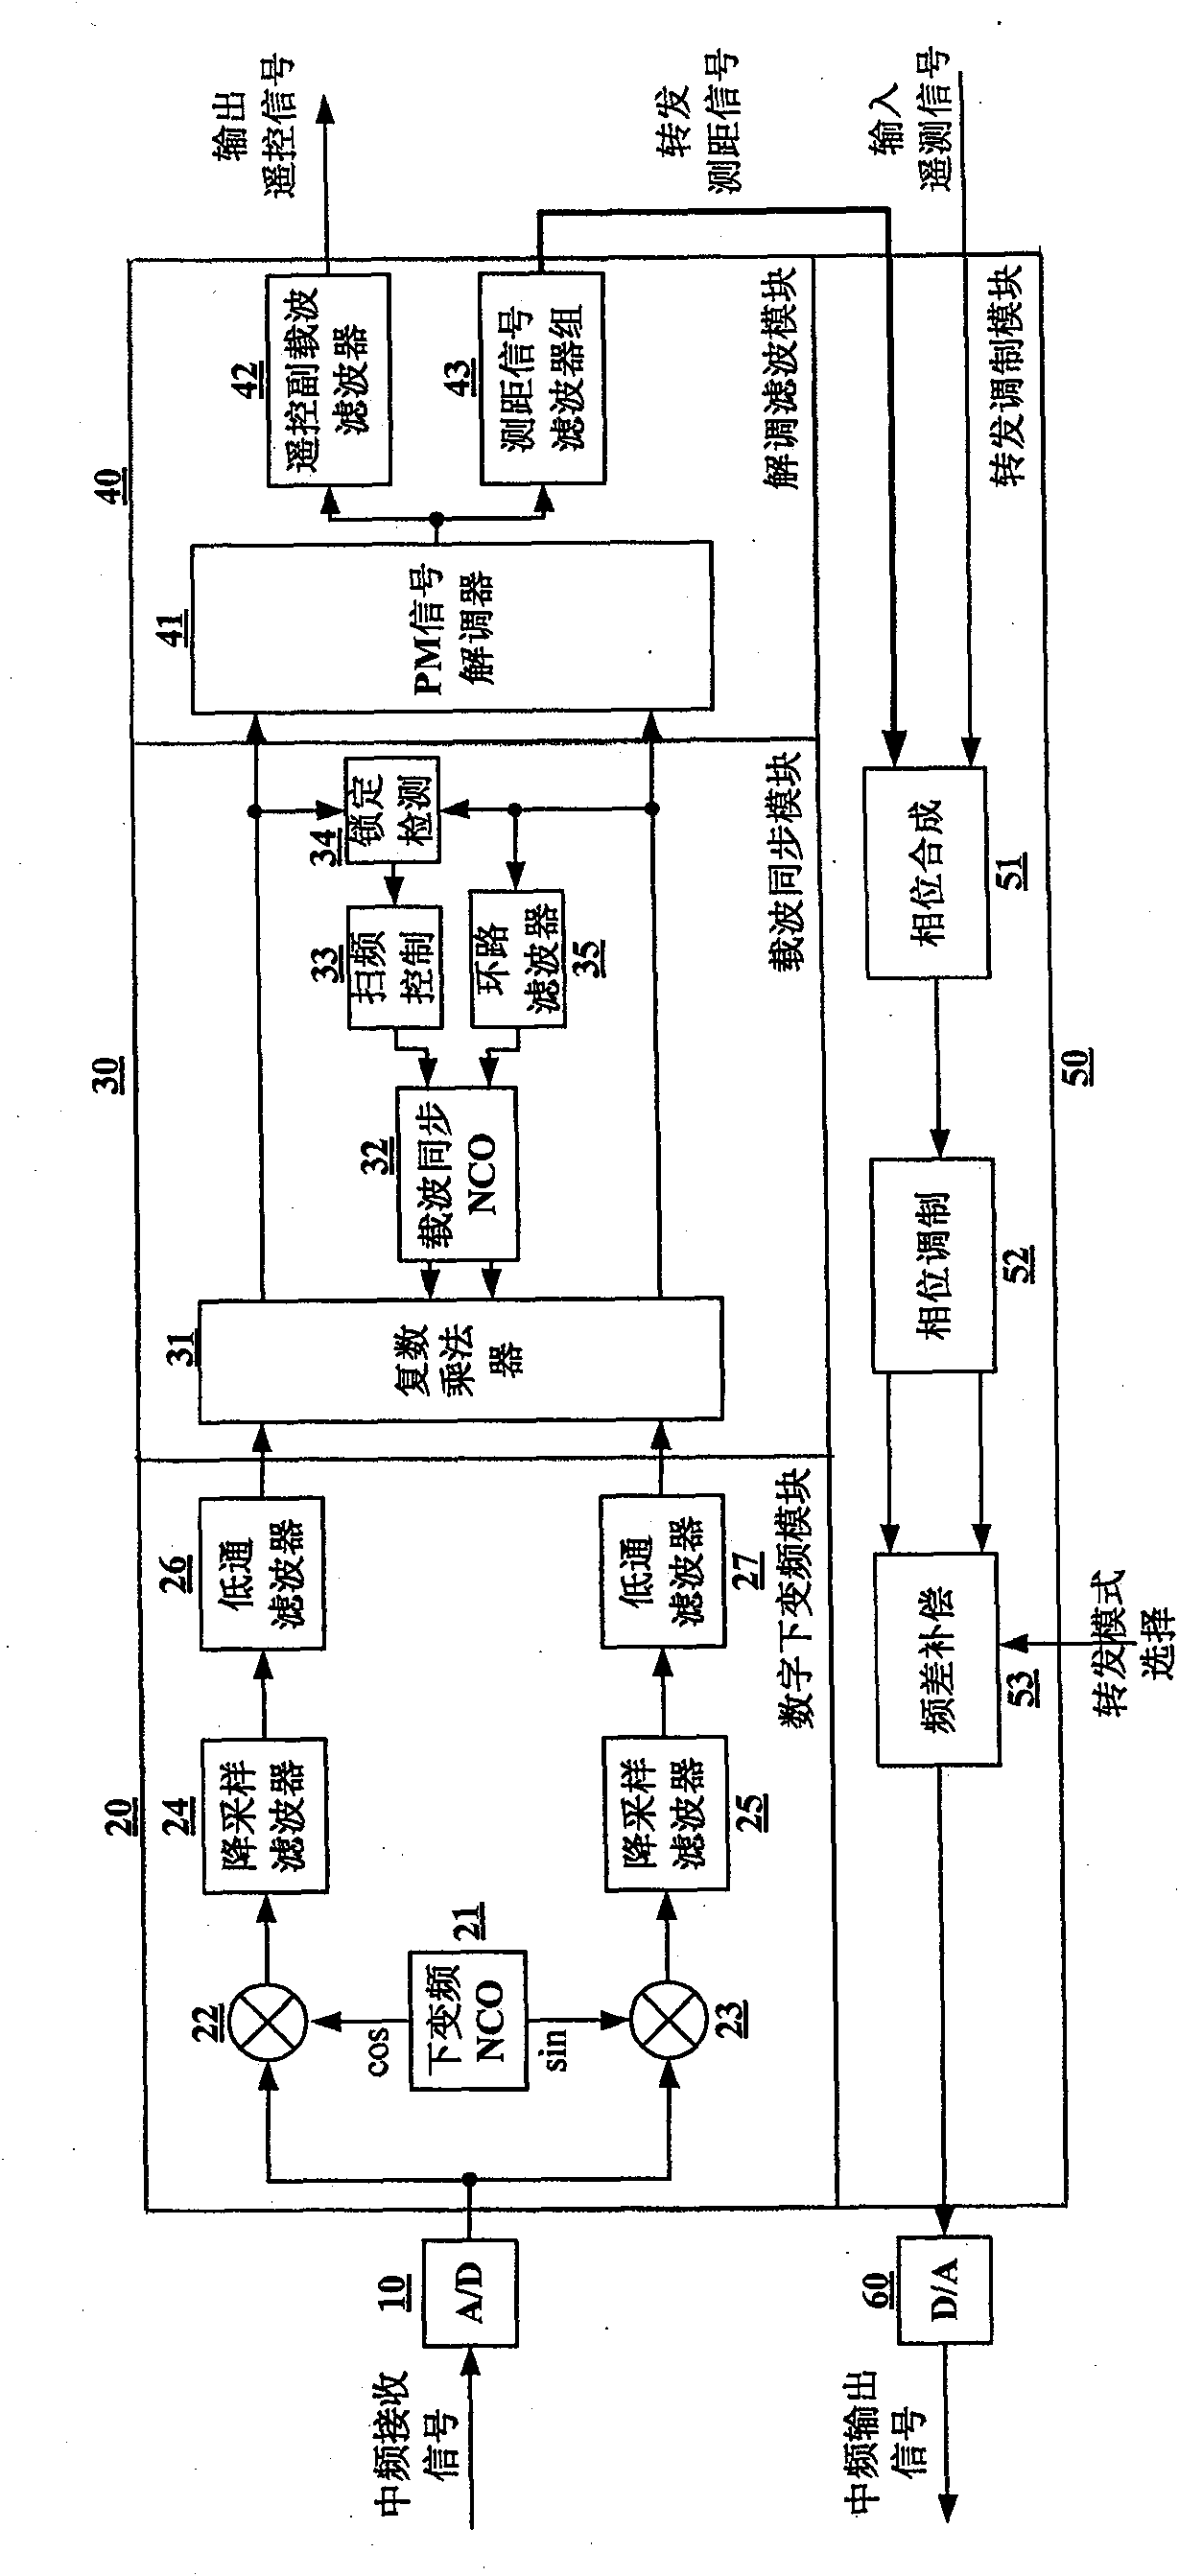 Emulational USB intermediate frequency responser used for satellite test and control